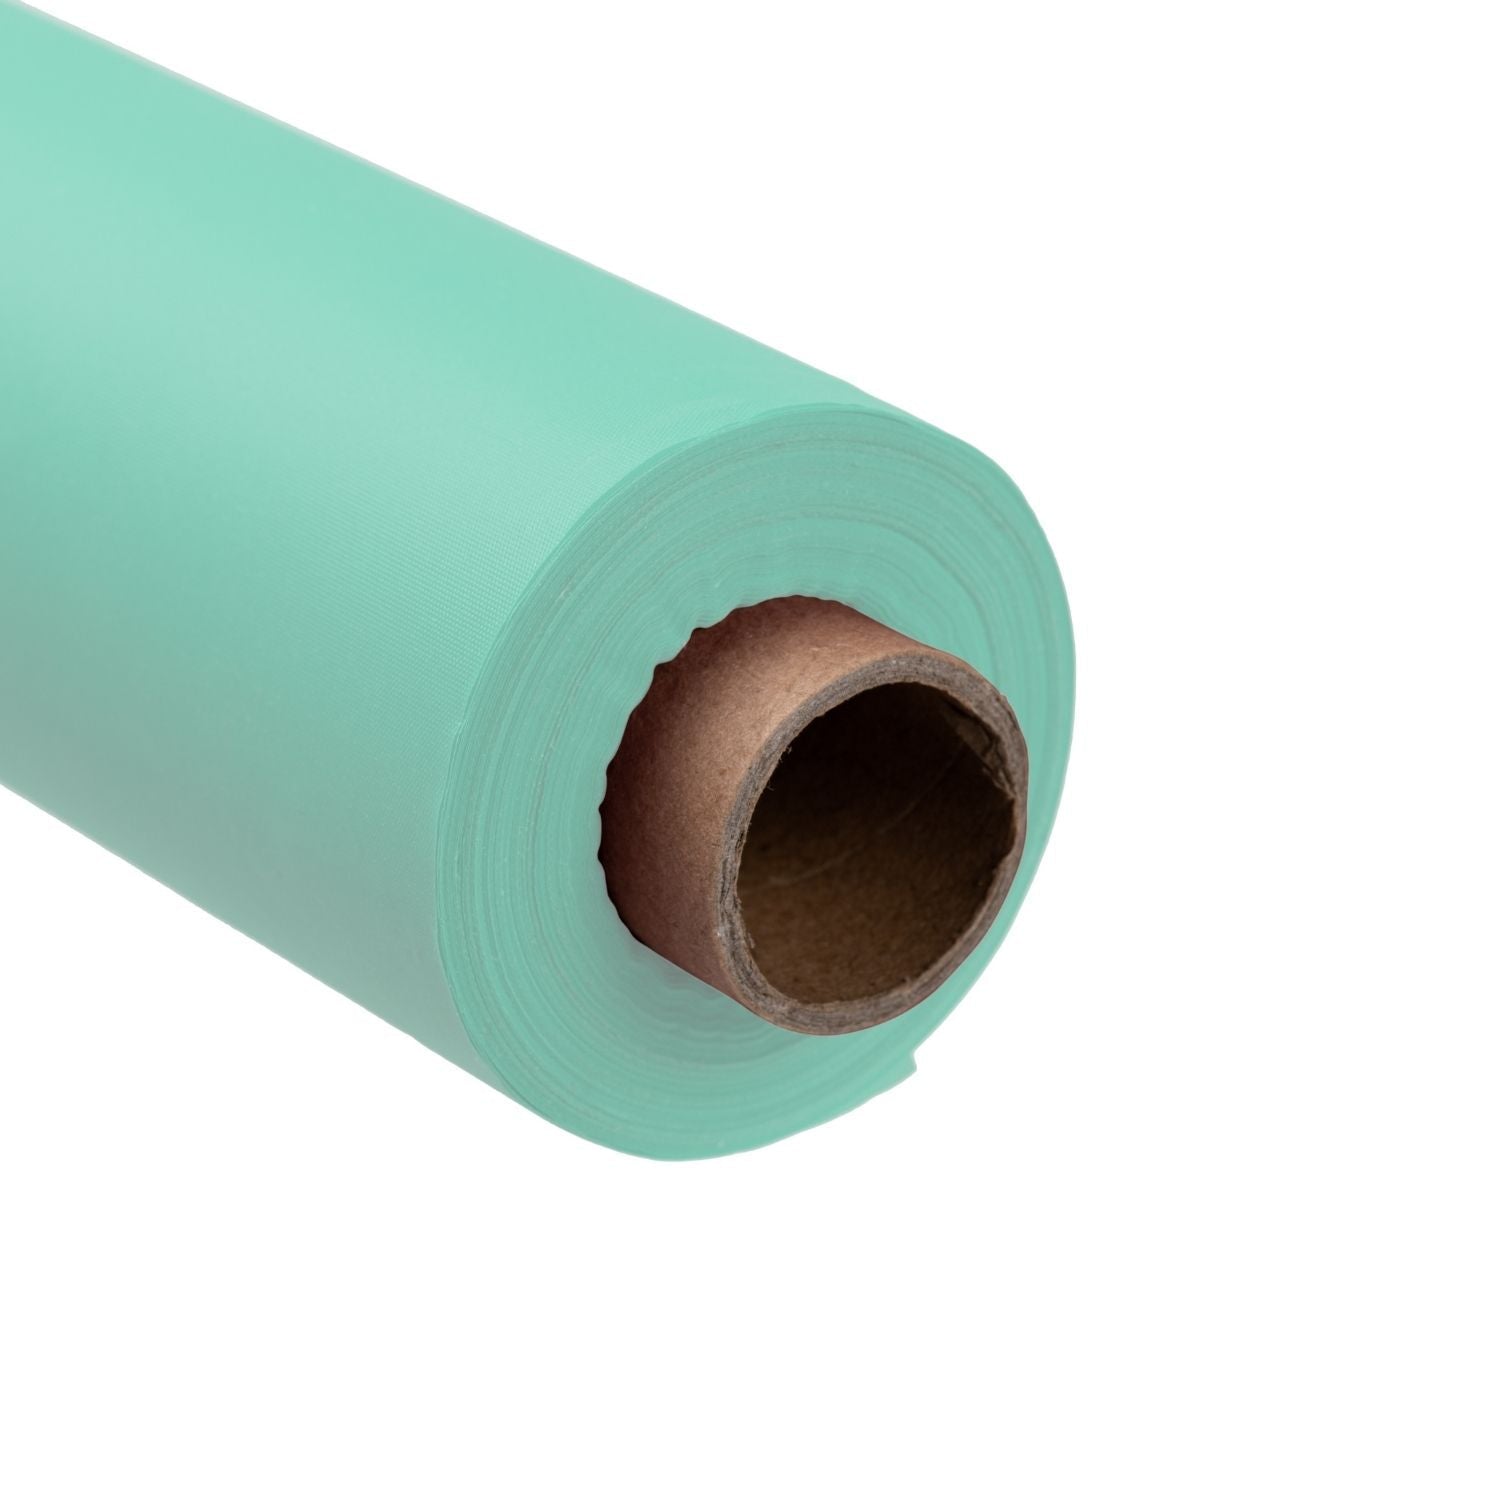 40 In. X 300 Ft. Premium Mint Plastic Table Roll | 4 Pack